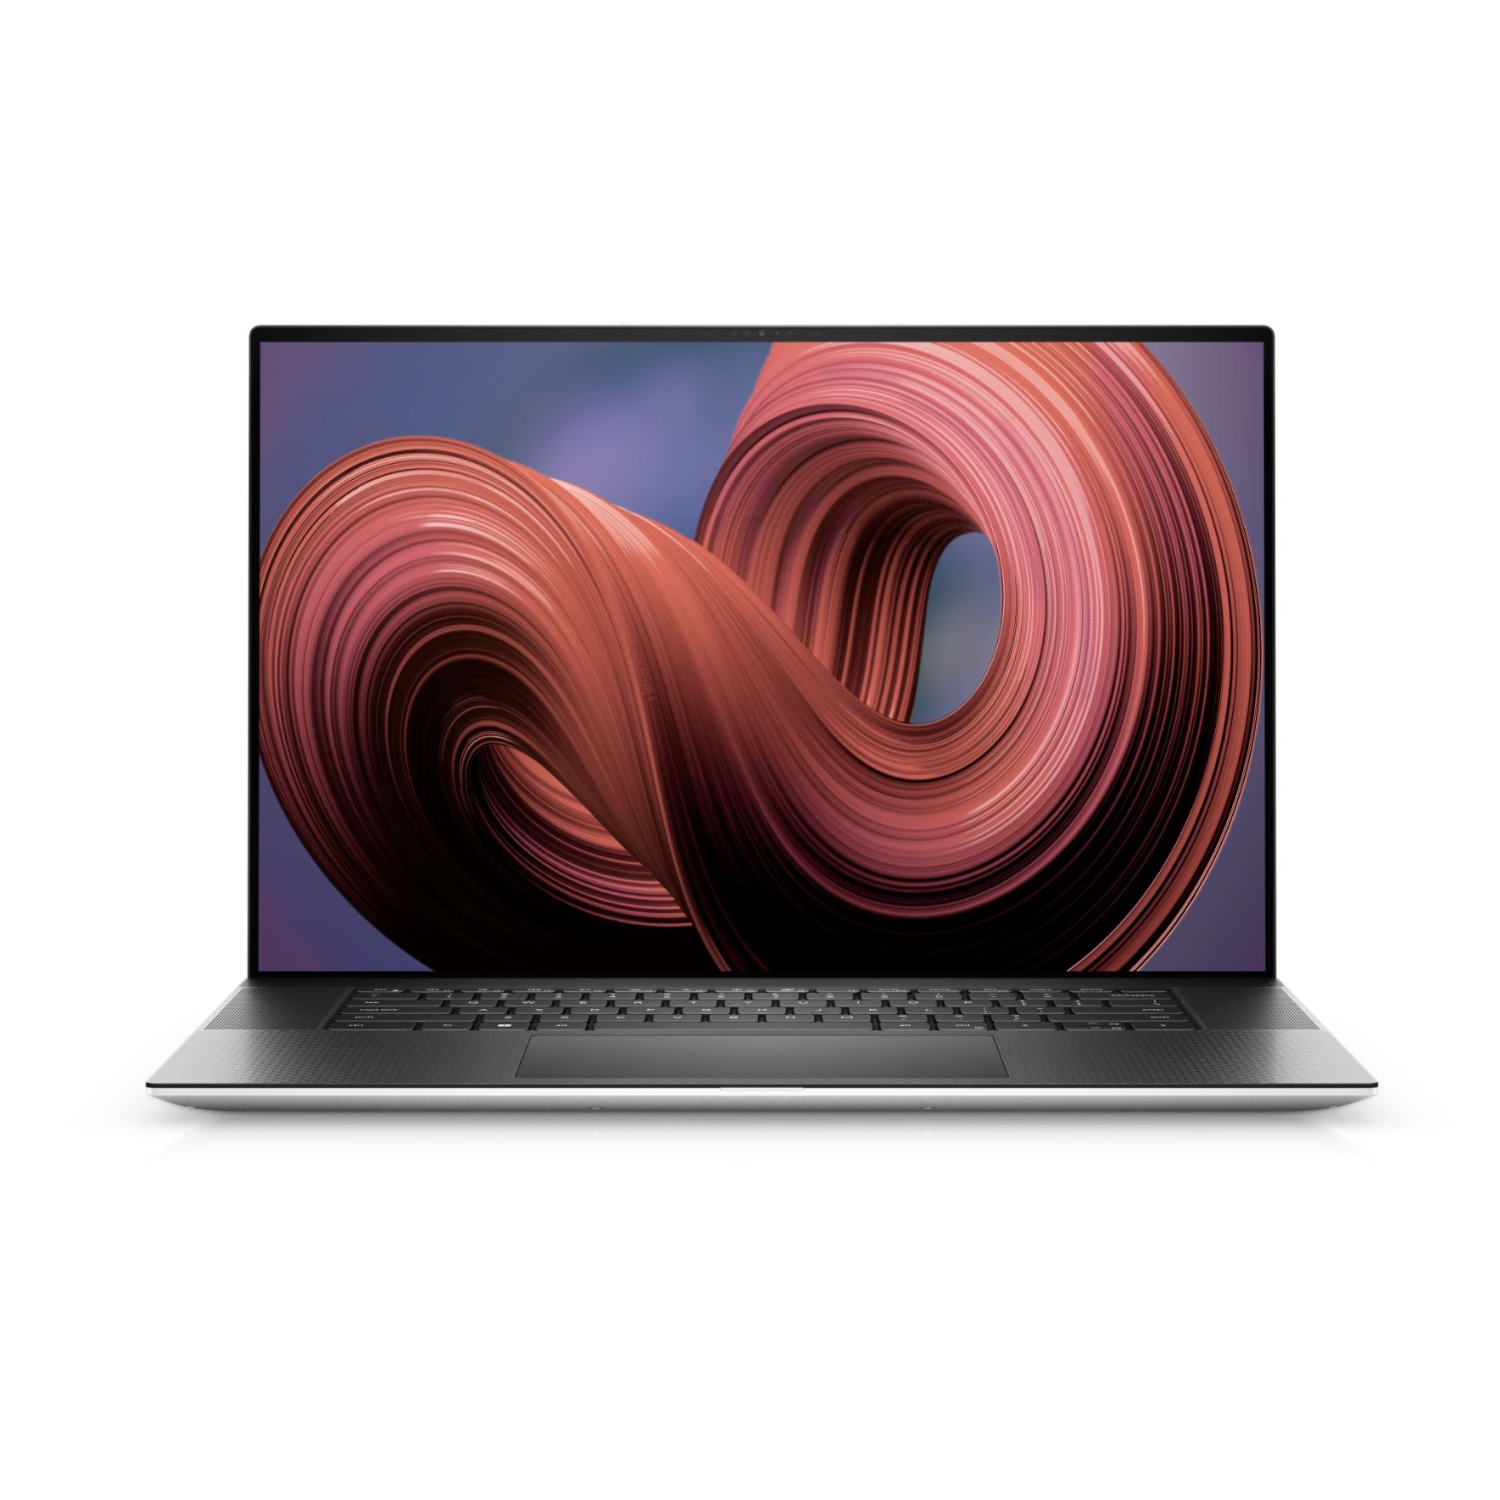 Refurbished (Excellent) Dell XPS 17 9730, 17" UHD Touch, Nvidia RTX 4080, i9-13900H, 32GB RAM, 1TB SSD, WIN 11 Pro